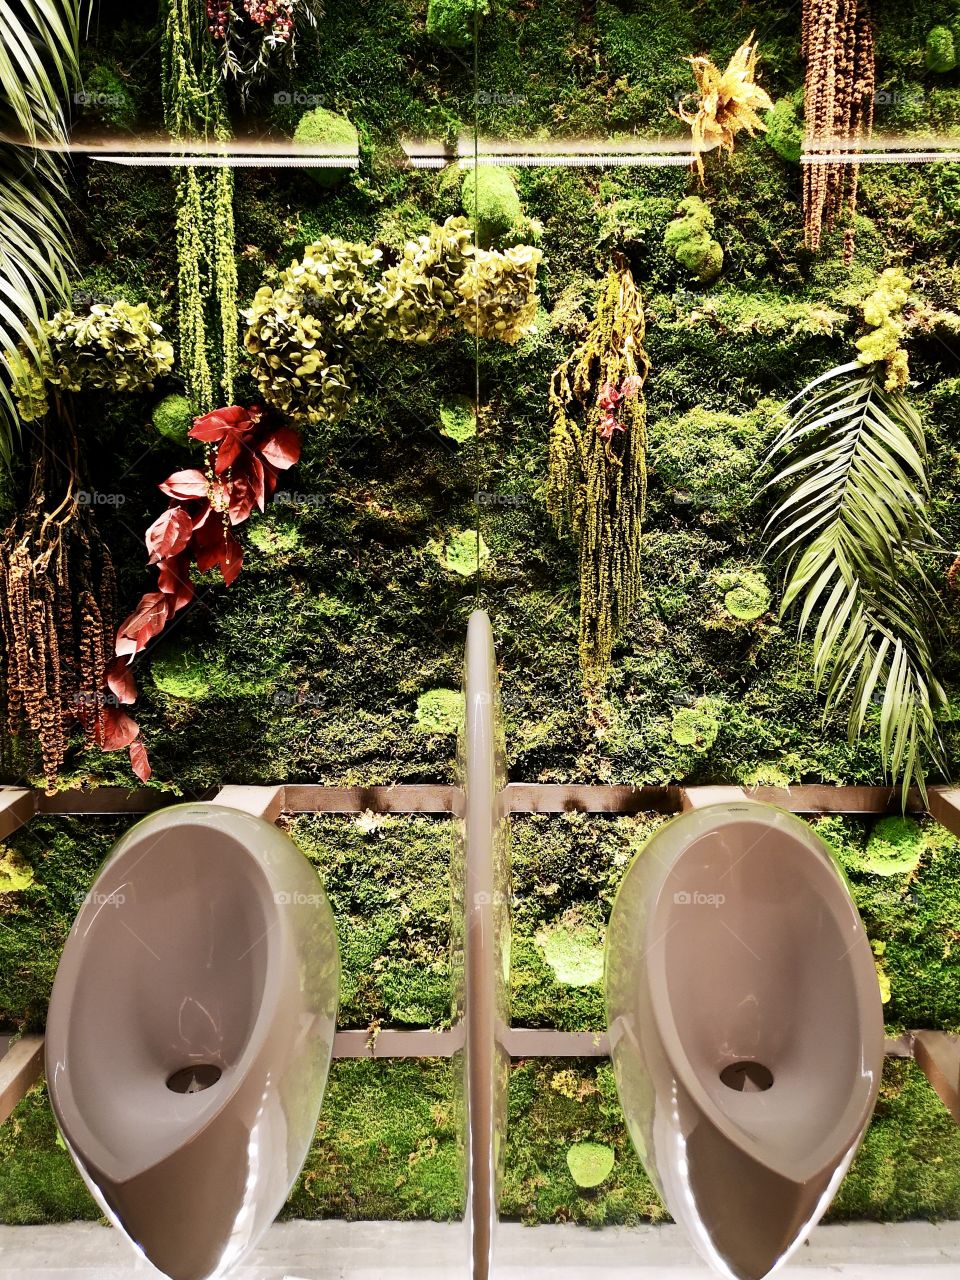 Two male urinal is a garden